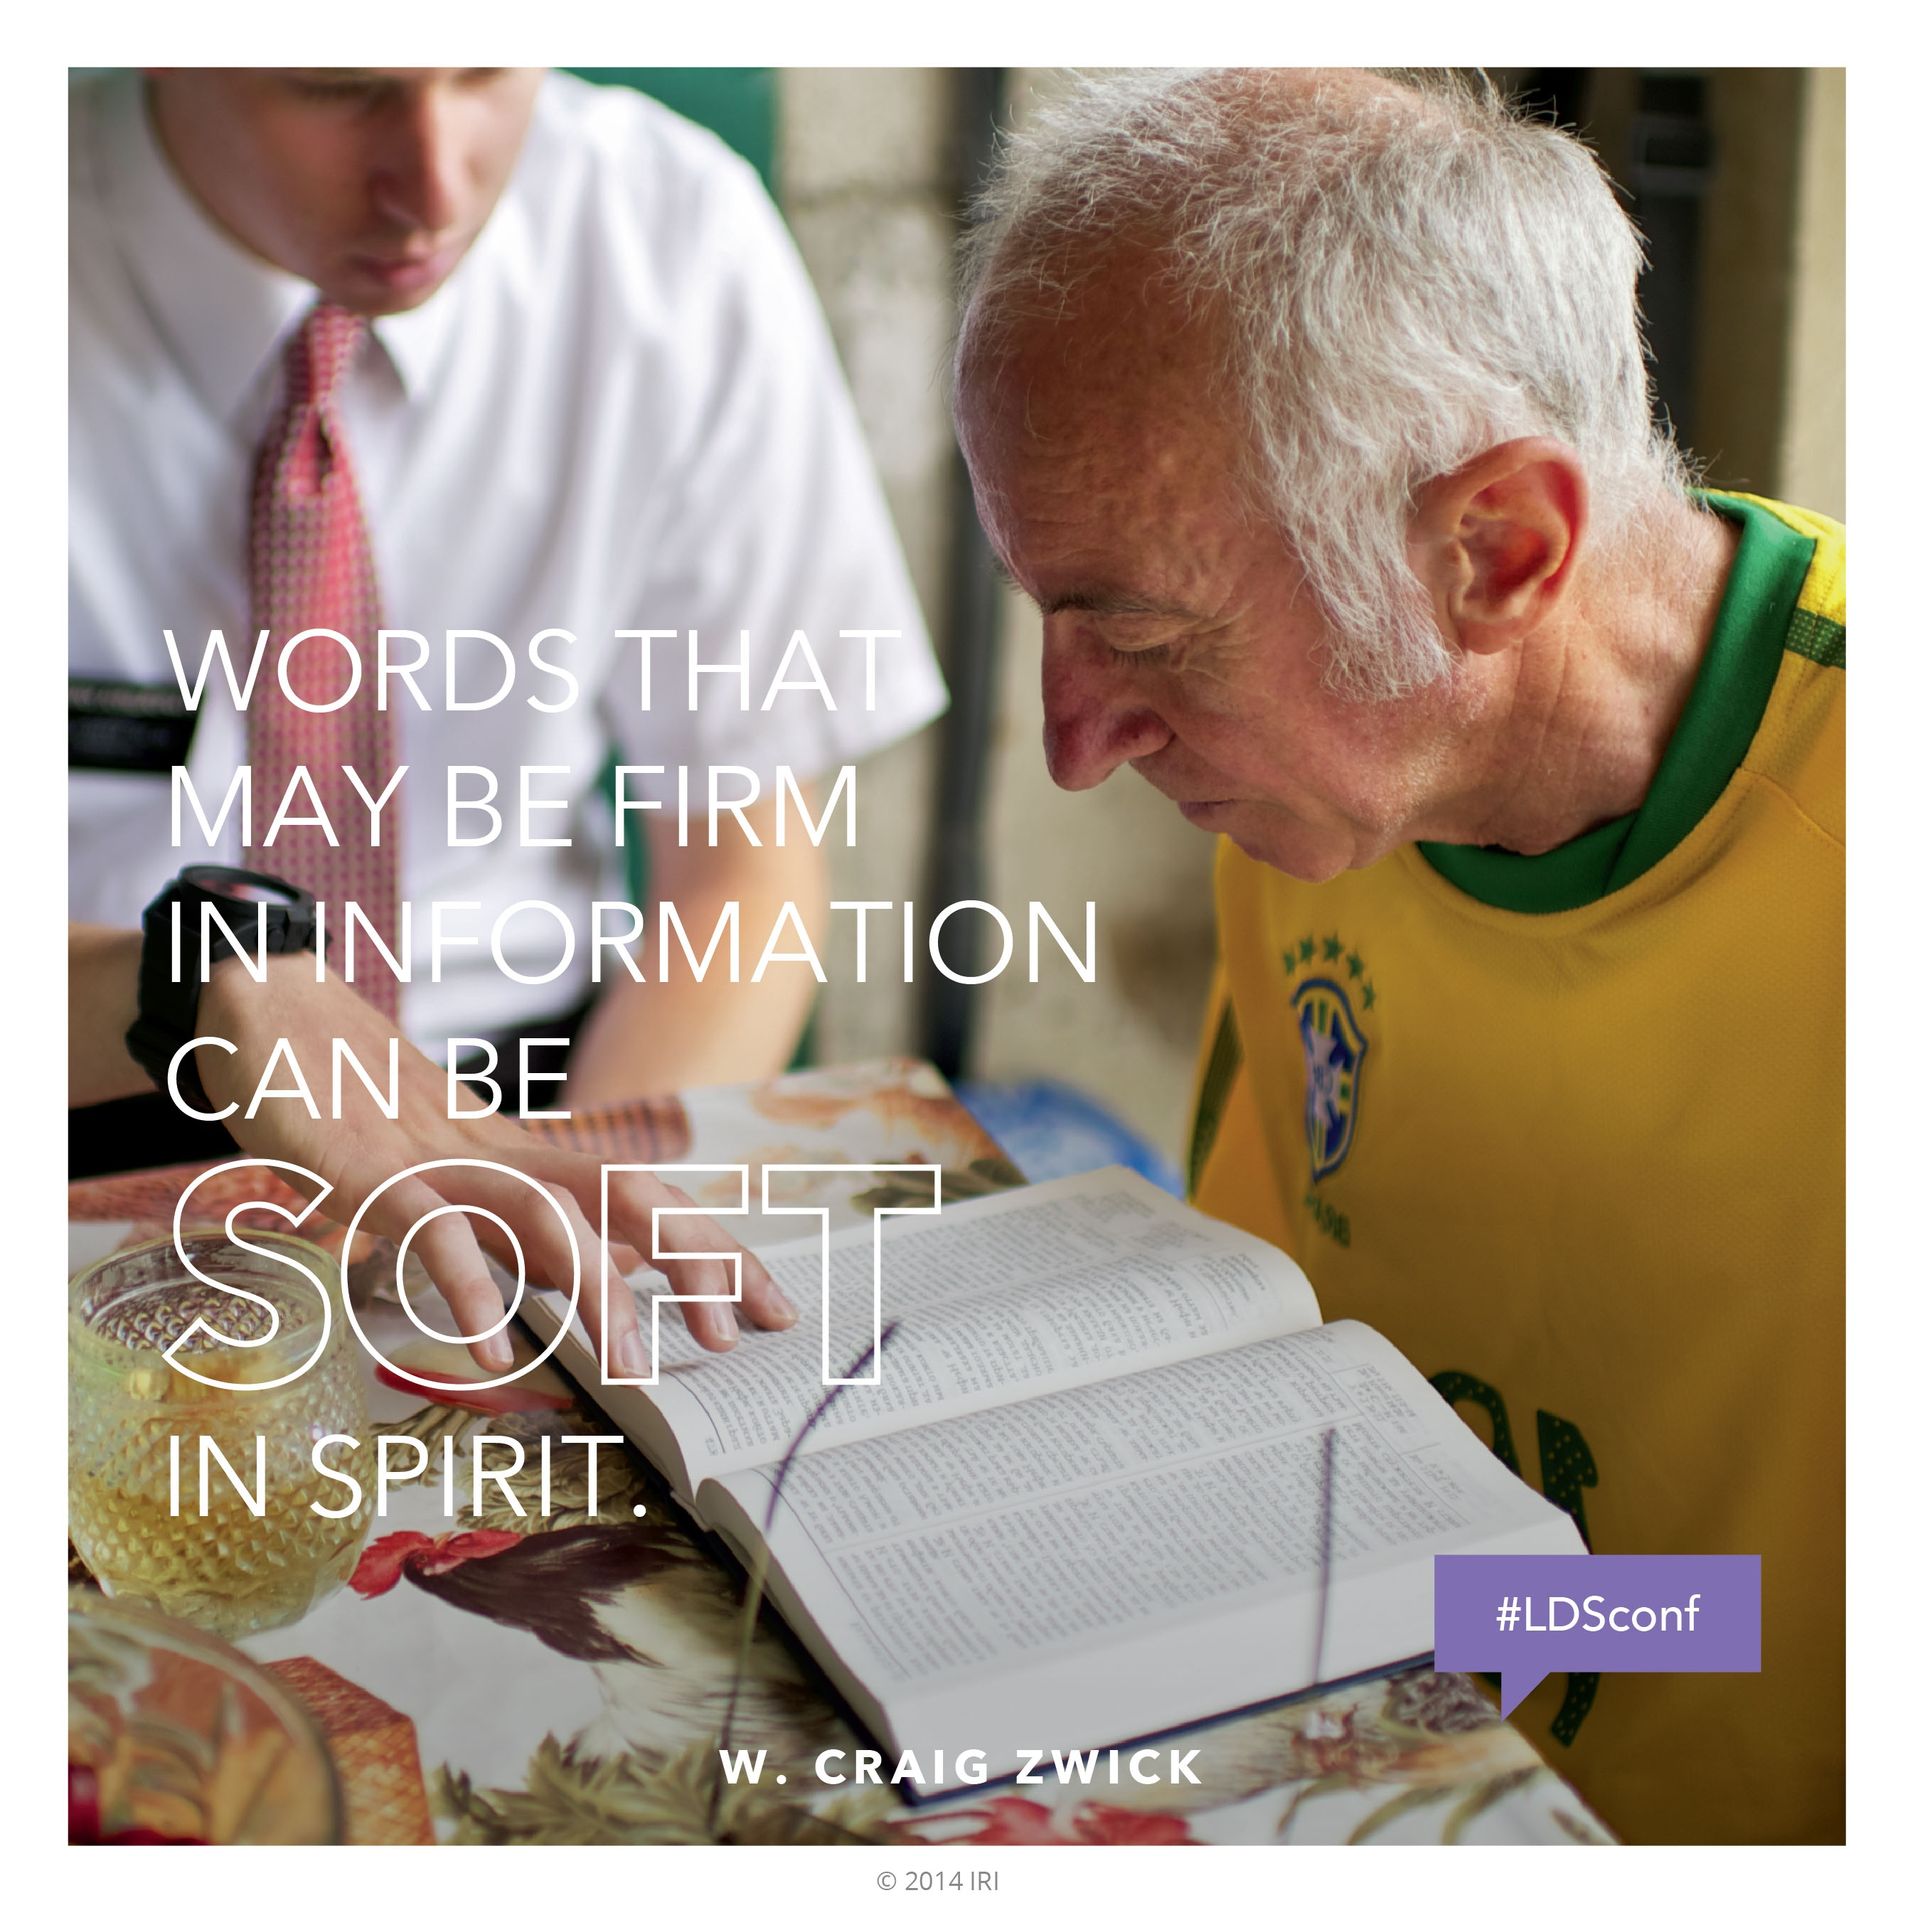 “Words that may be firm in information can be soft in spirit.”—Elder W. Craig Zwick, “What Are You Thinking?” © undefined ipCode 1.